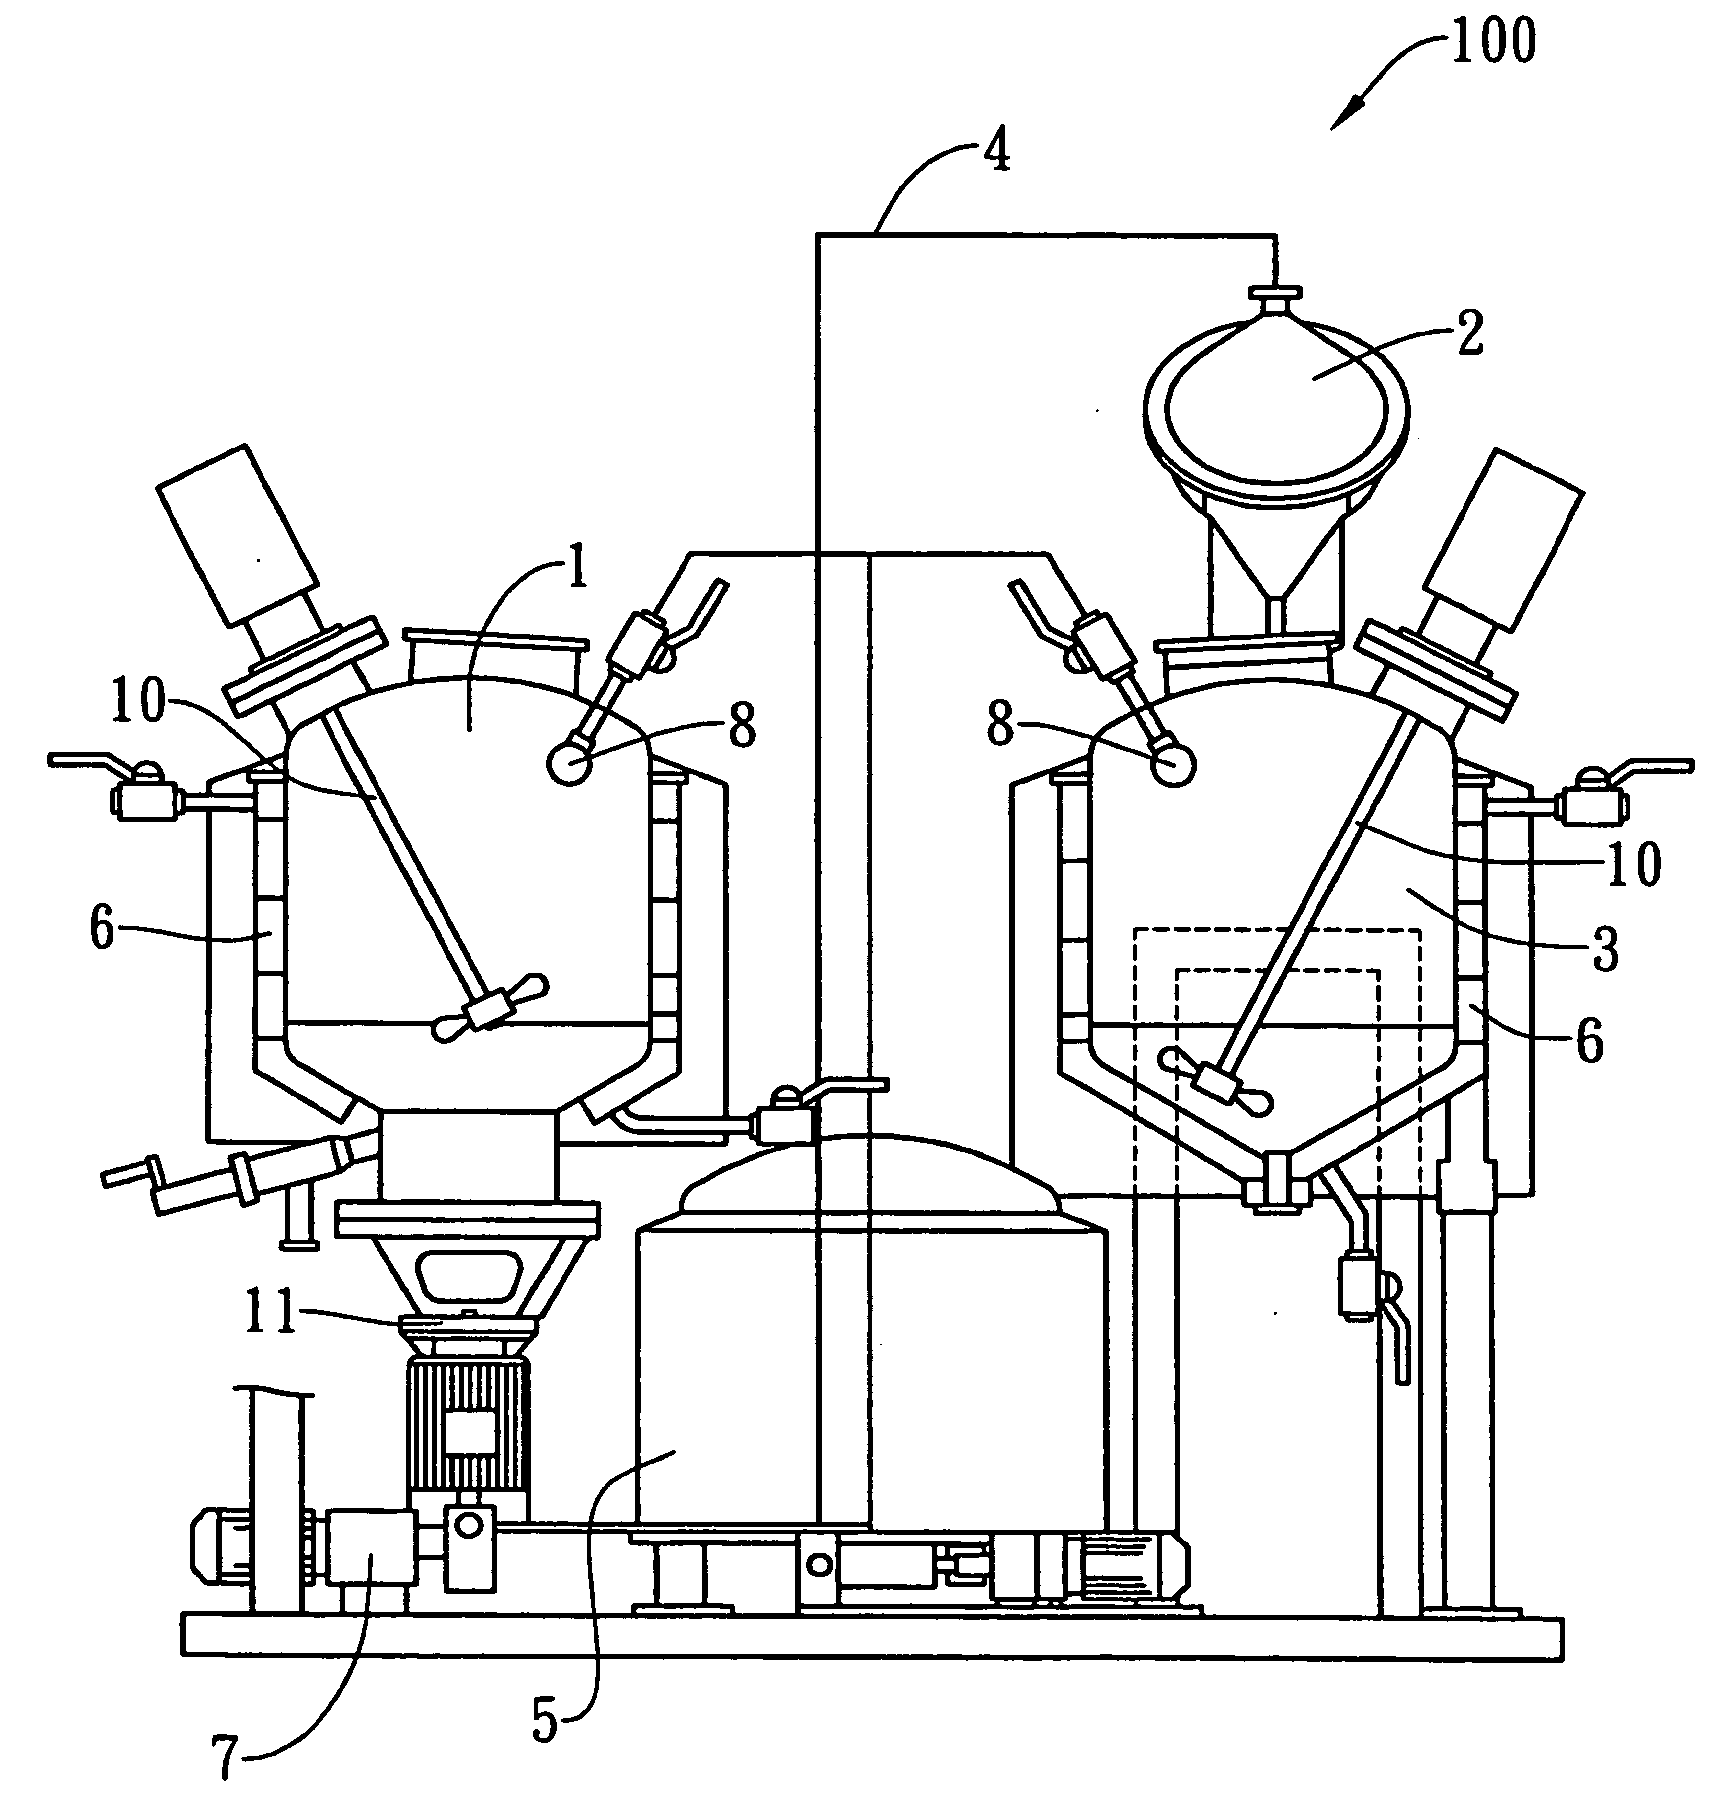 Bean processing device and a method for using the same